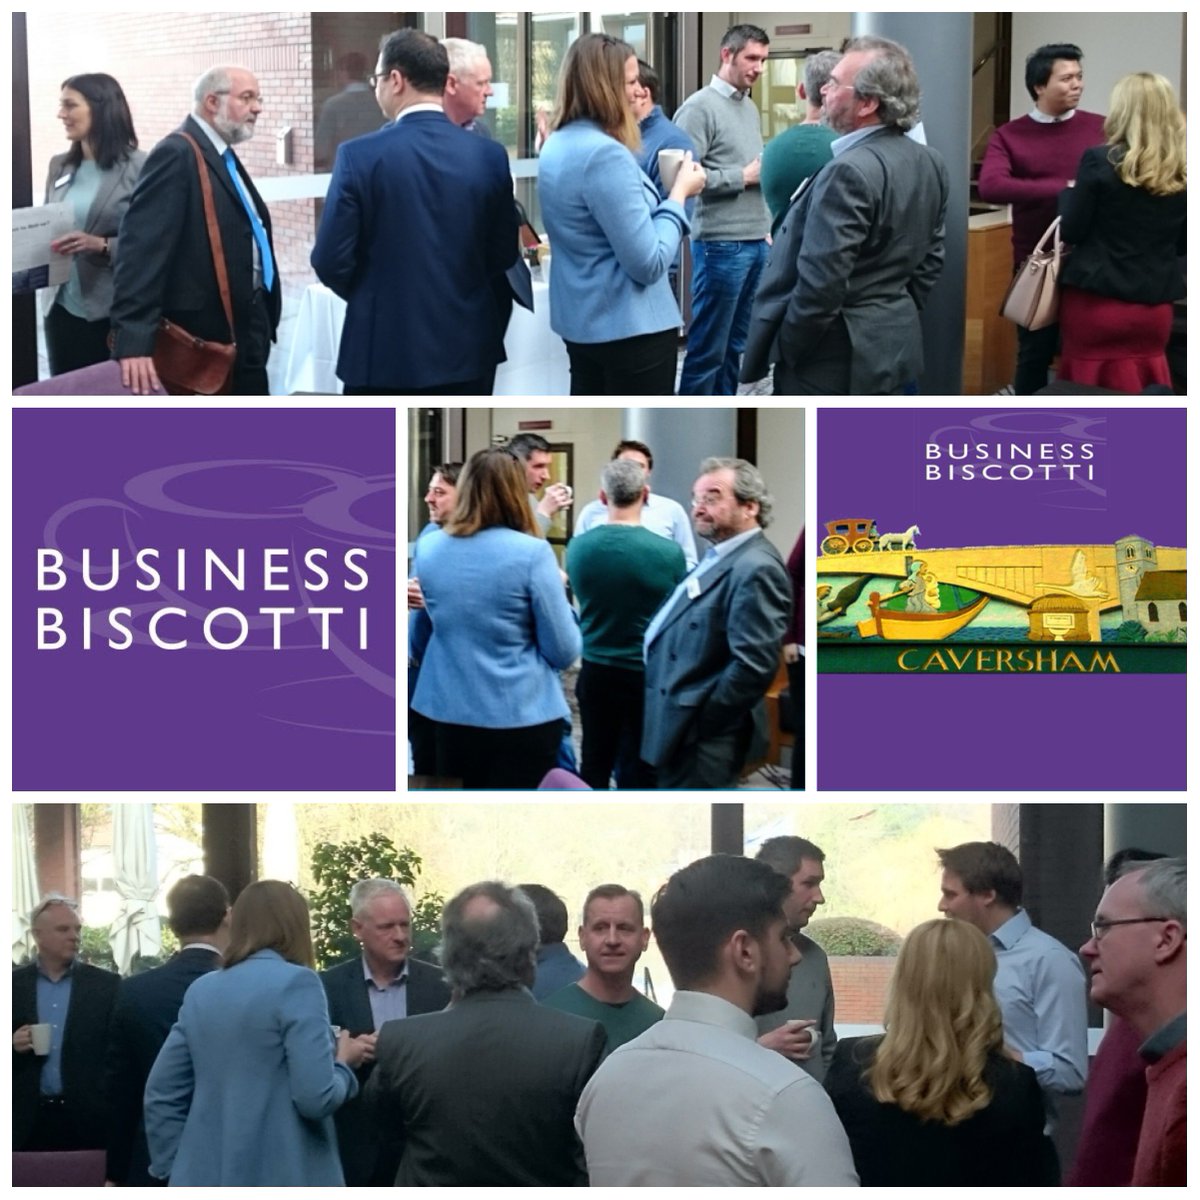 Invest some time in #business #networking this Friday 26th January with our next #Caversham club meeting. Join fellow business people in relaxed surroundings at the #CrownPlazaHotel between 10am and 12noon - see you there!